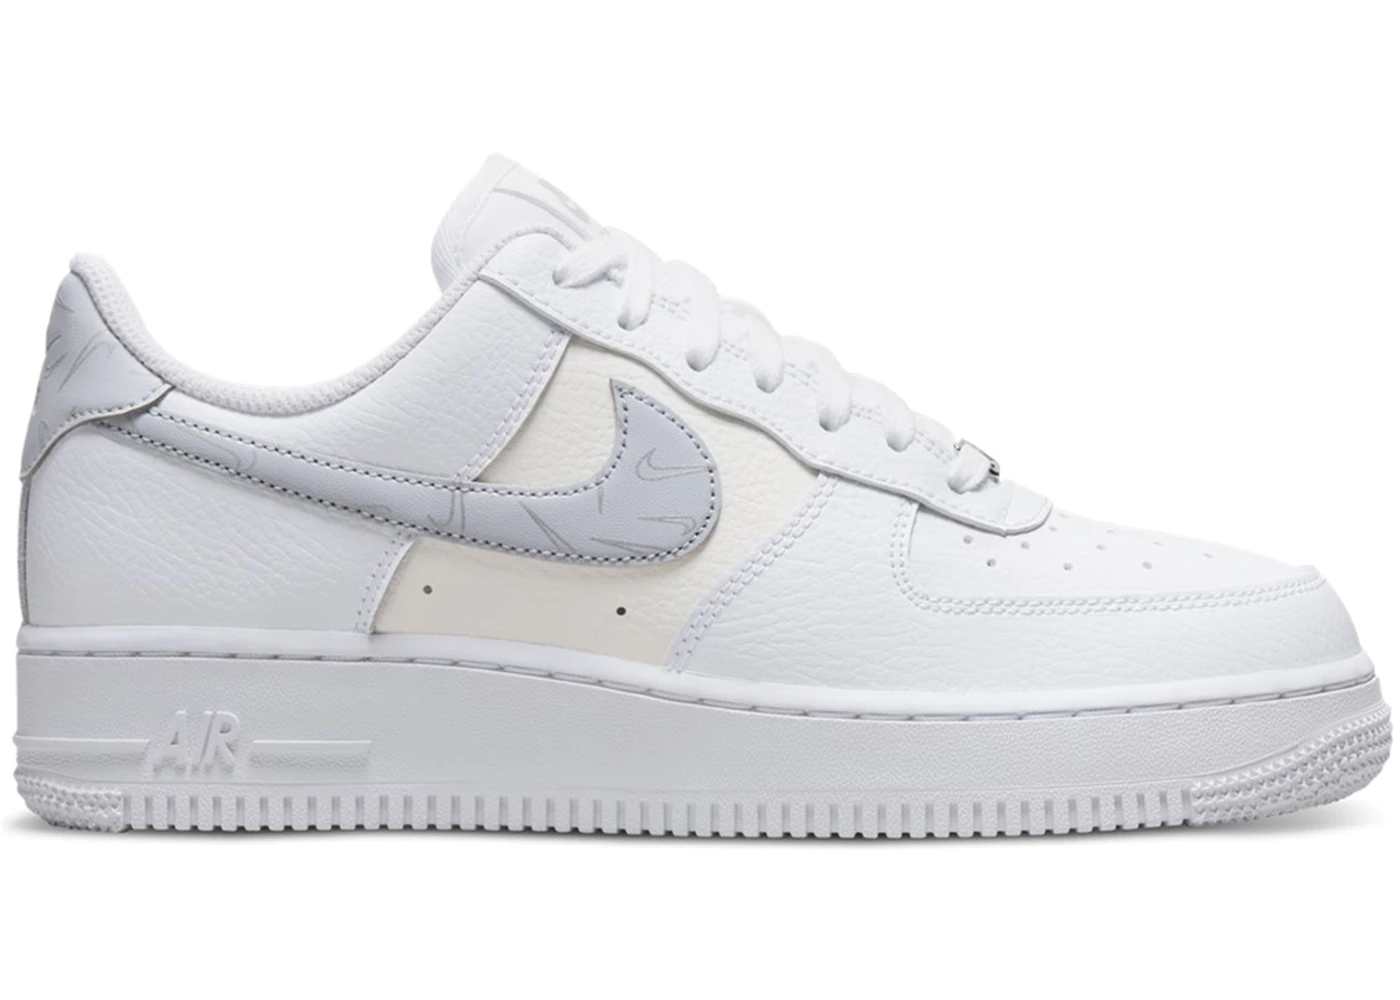 cooking Raincoat Condense Now Available: Nike Air Force 1 Low Mini Swoosh (W) "Metallic Silver" —  Sneaker Shouts